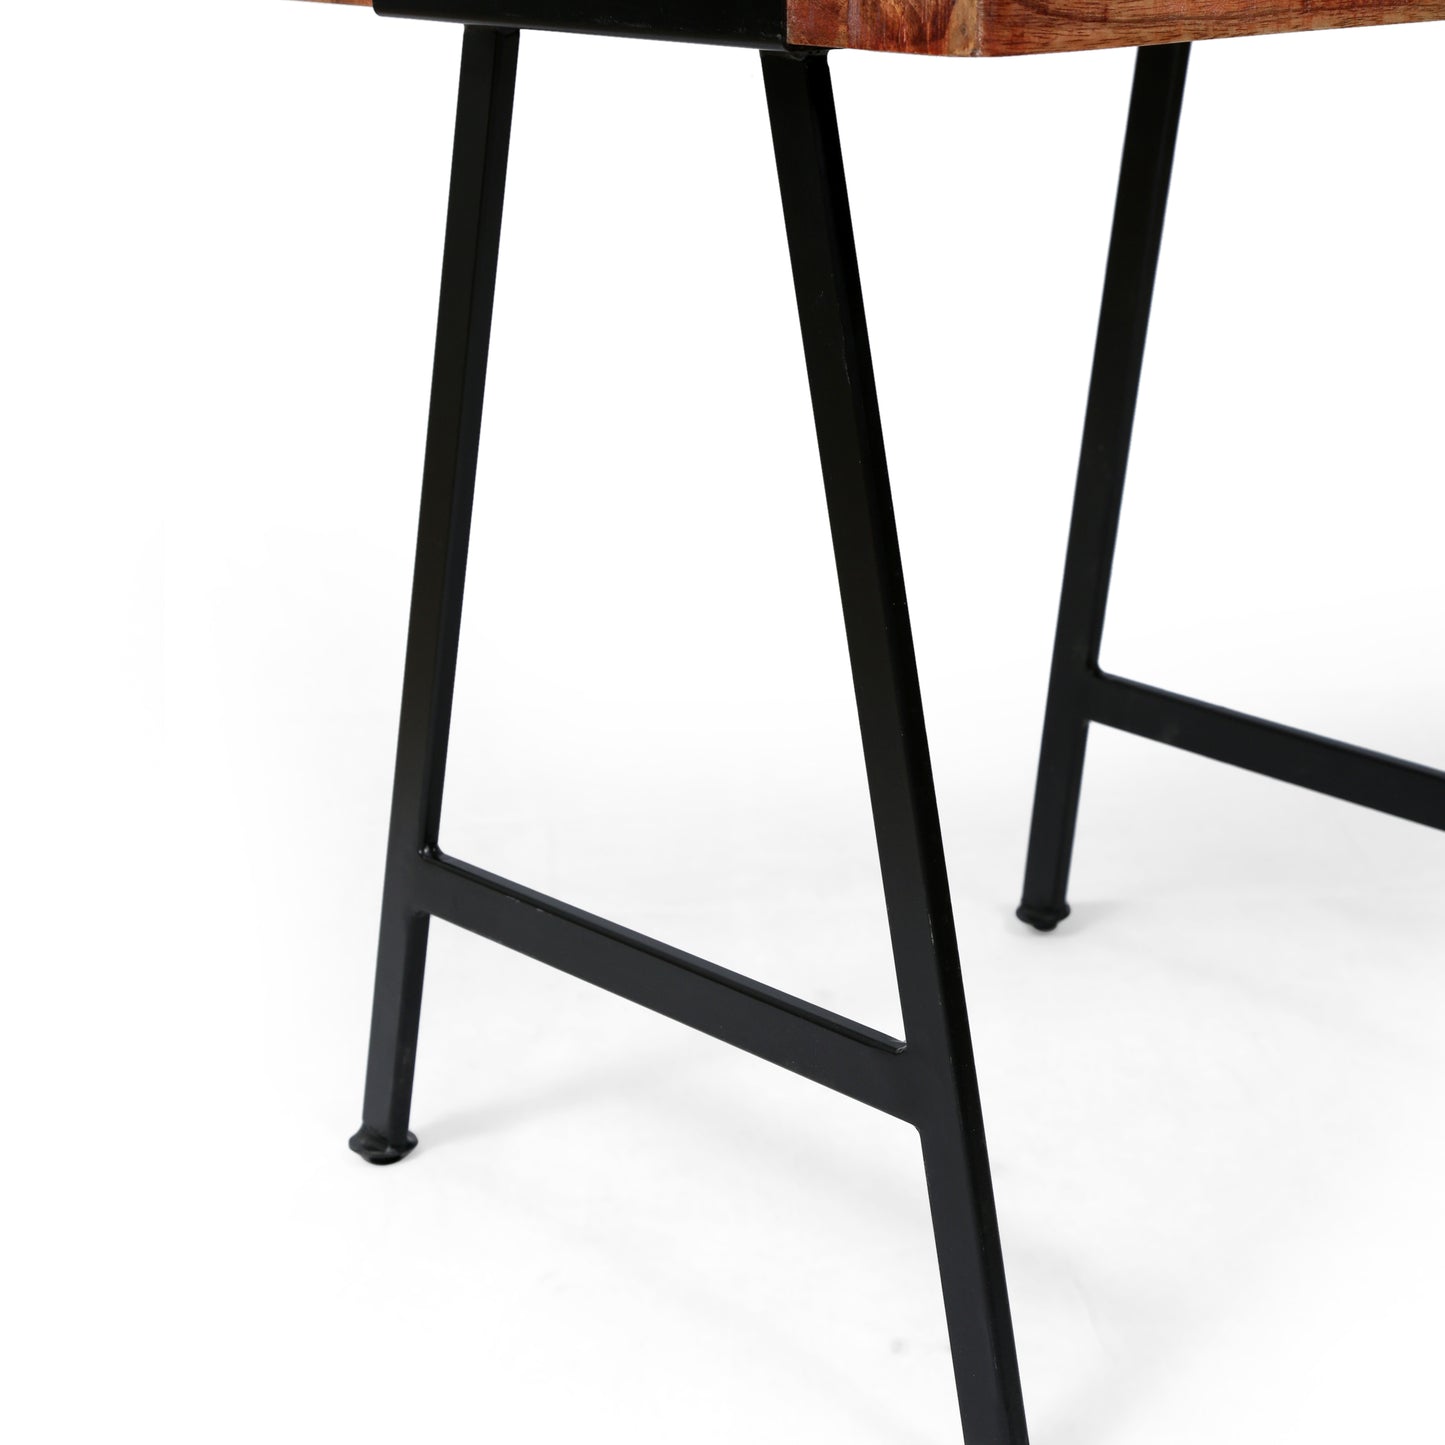 Rosewood Handcrafted Boho Mango Wood End Table